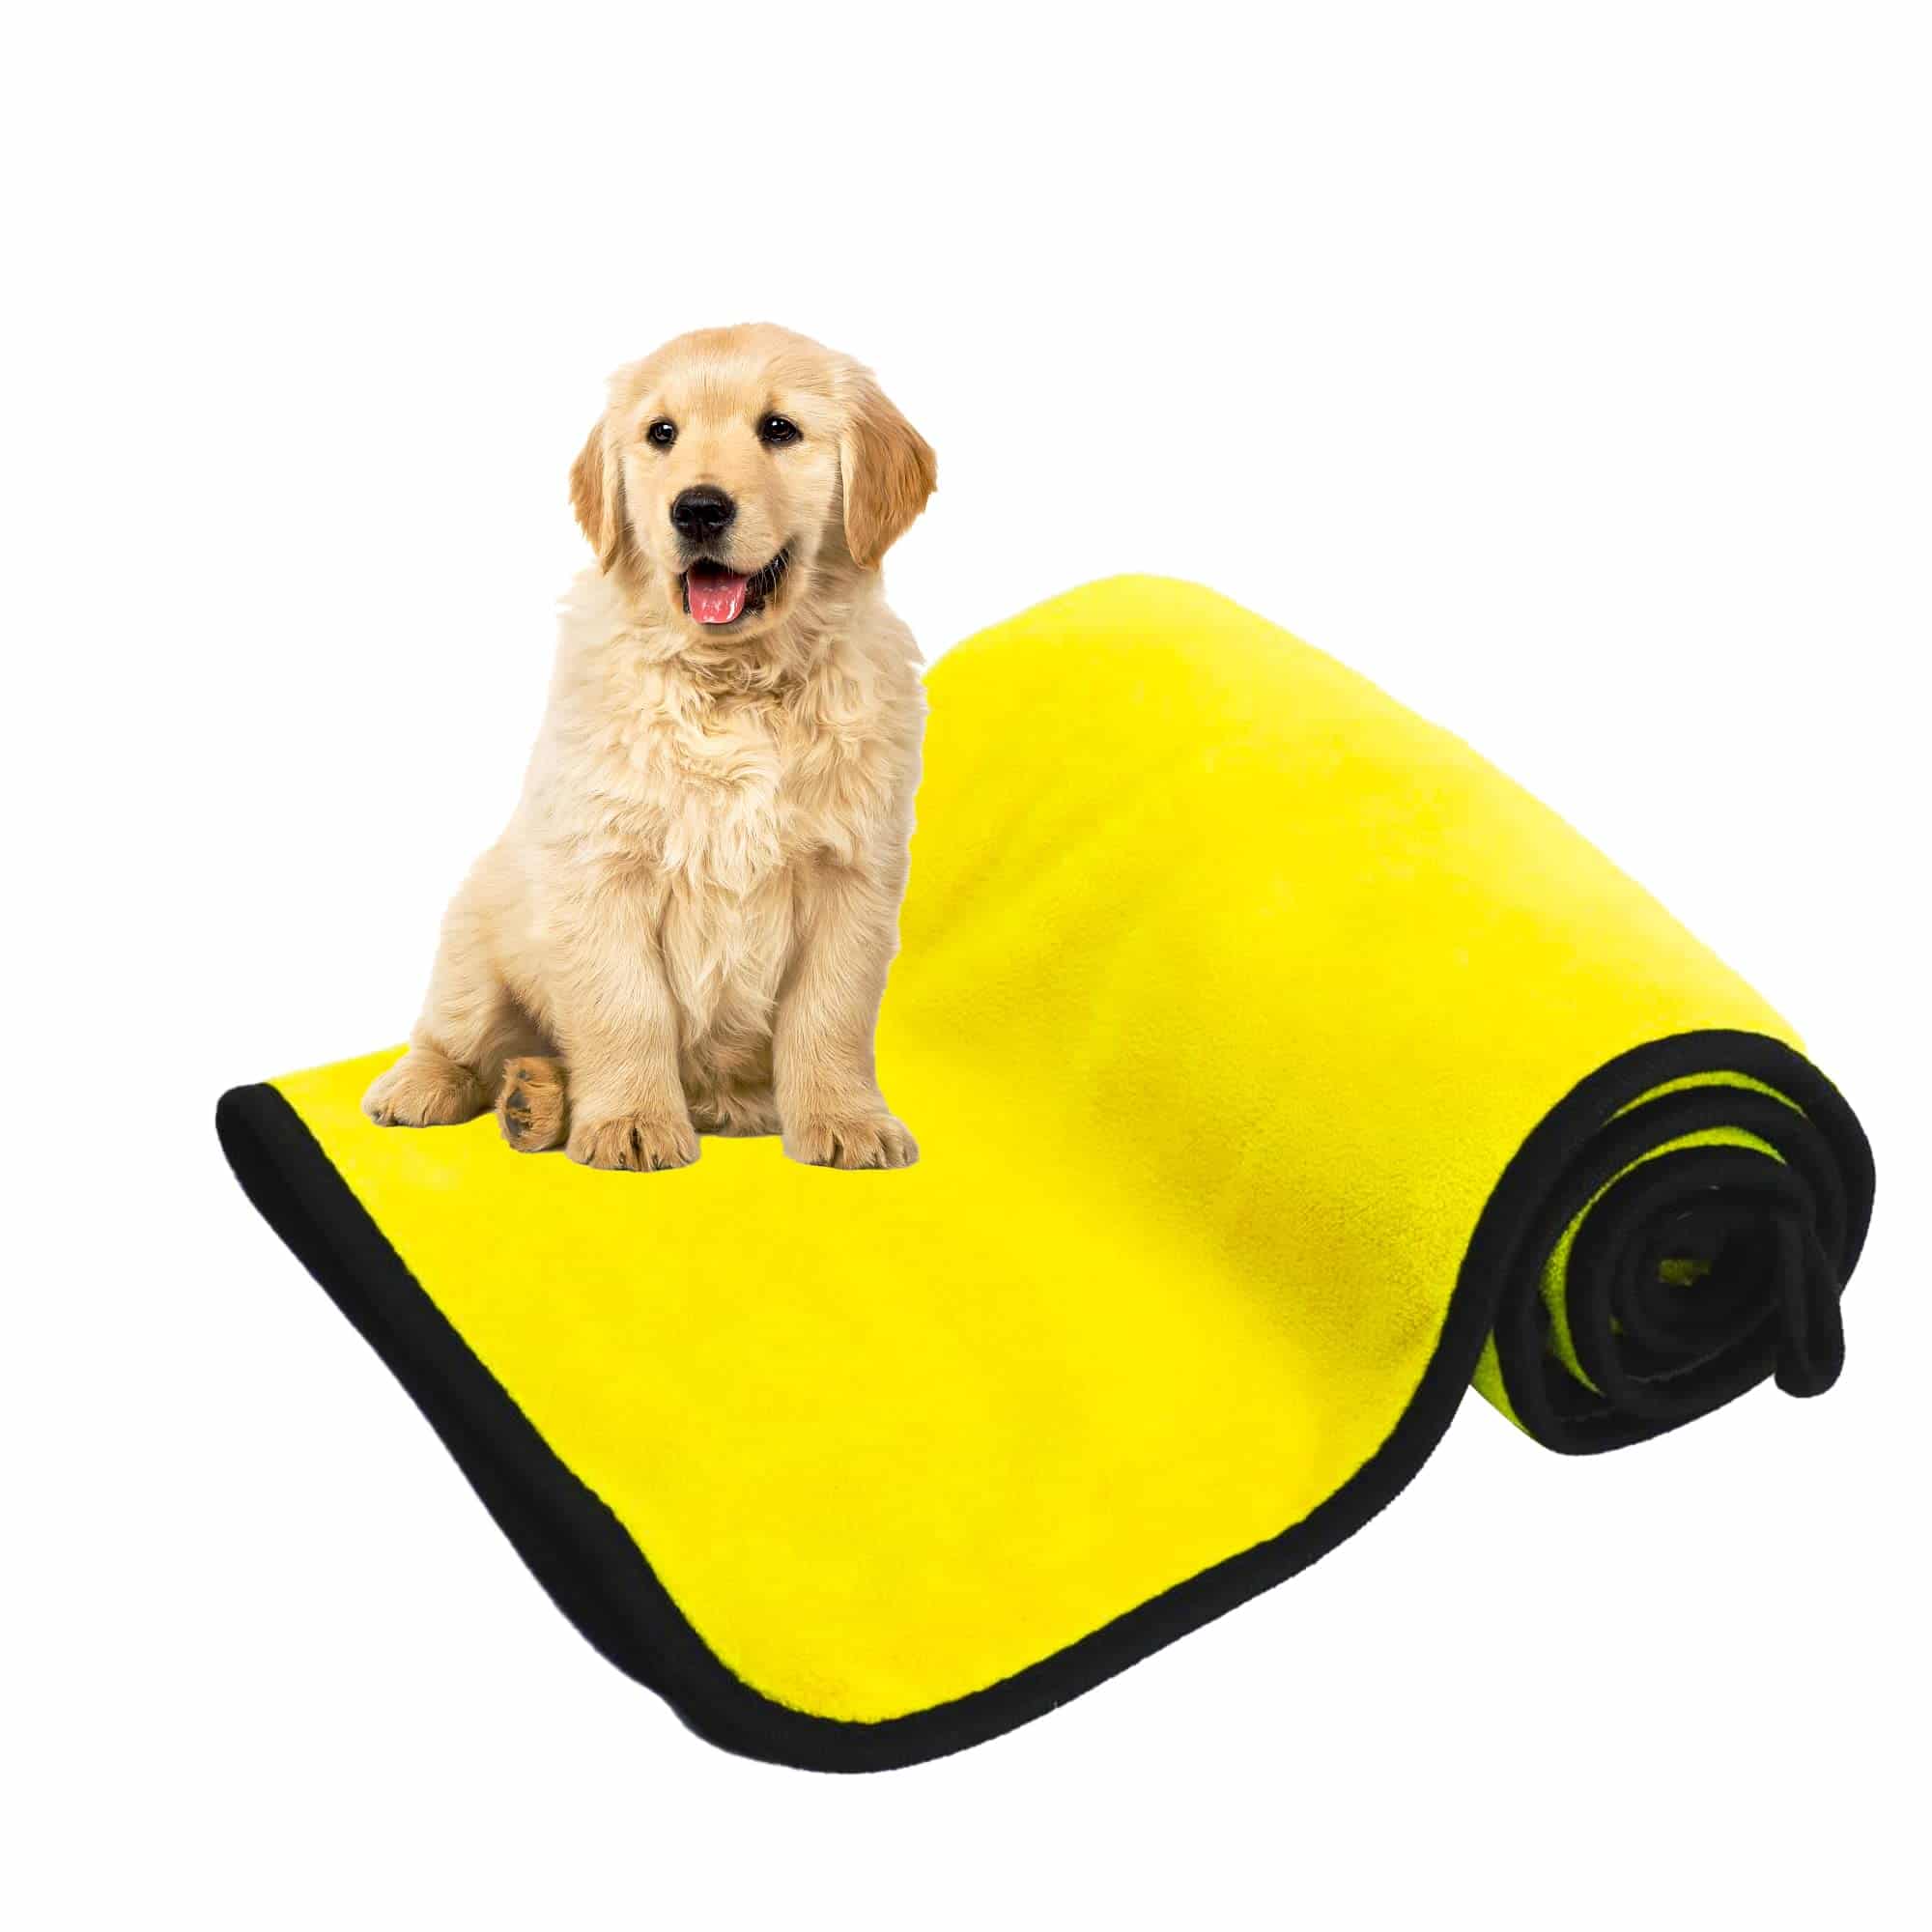 Dog quick-drying towel for dogs